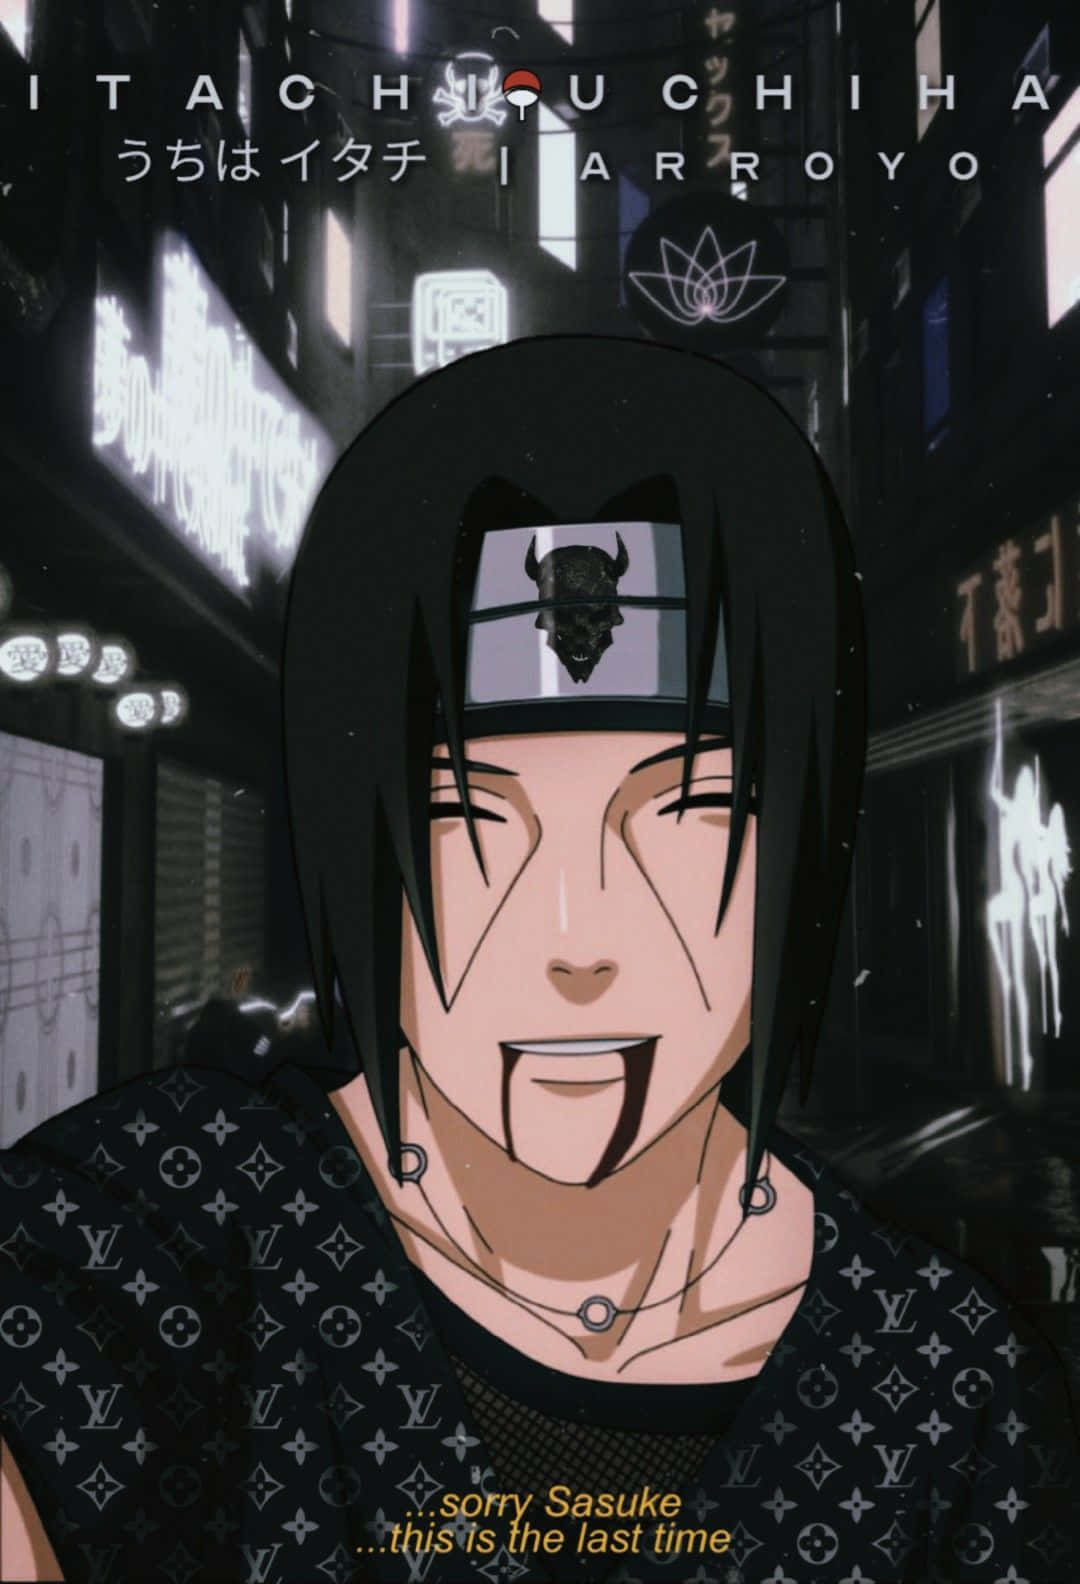 Itachi Aesthetic Blood Coming Out From Mouth While Apologizing To Sasuke Background